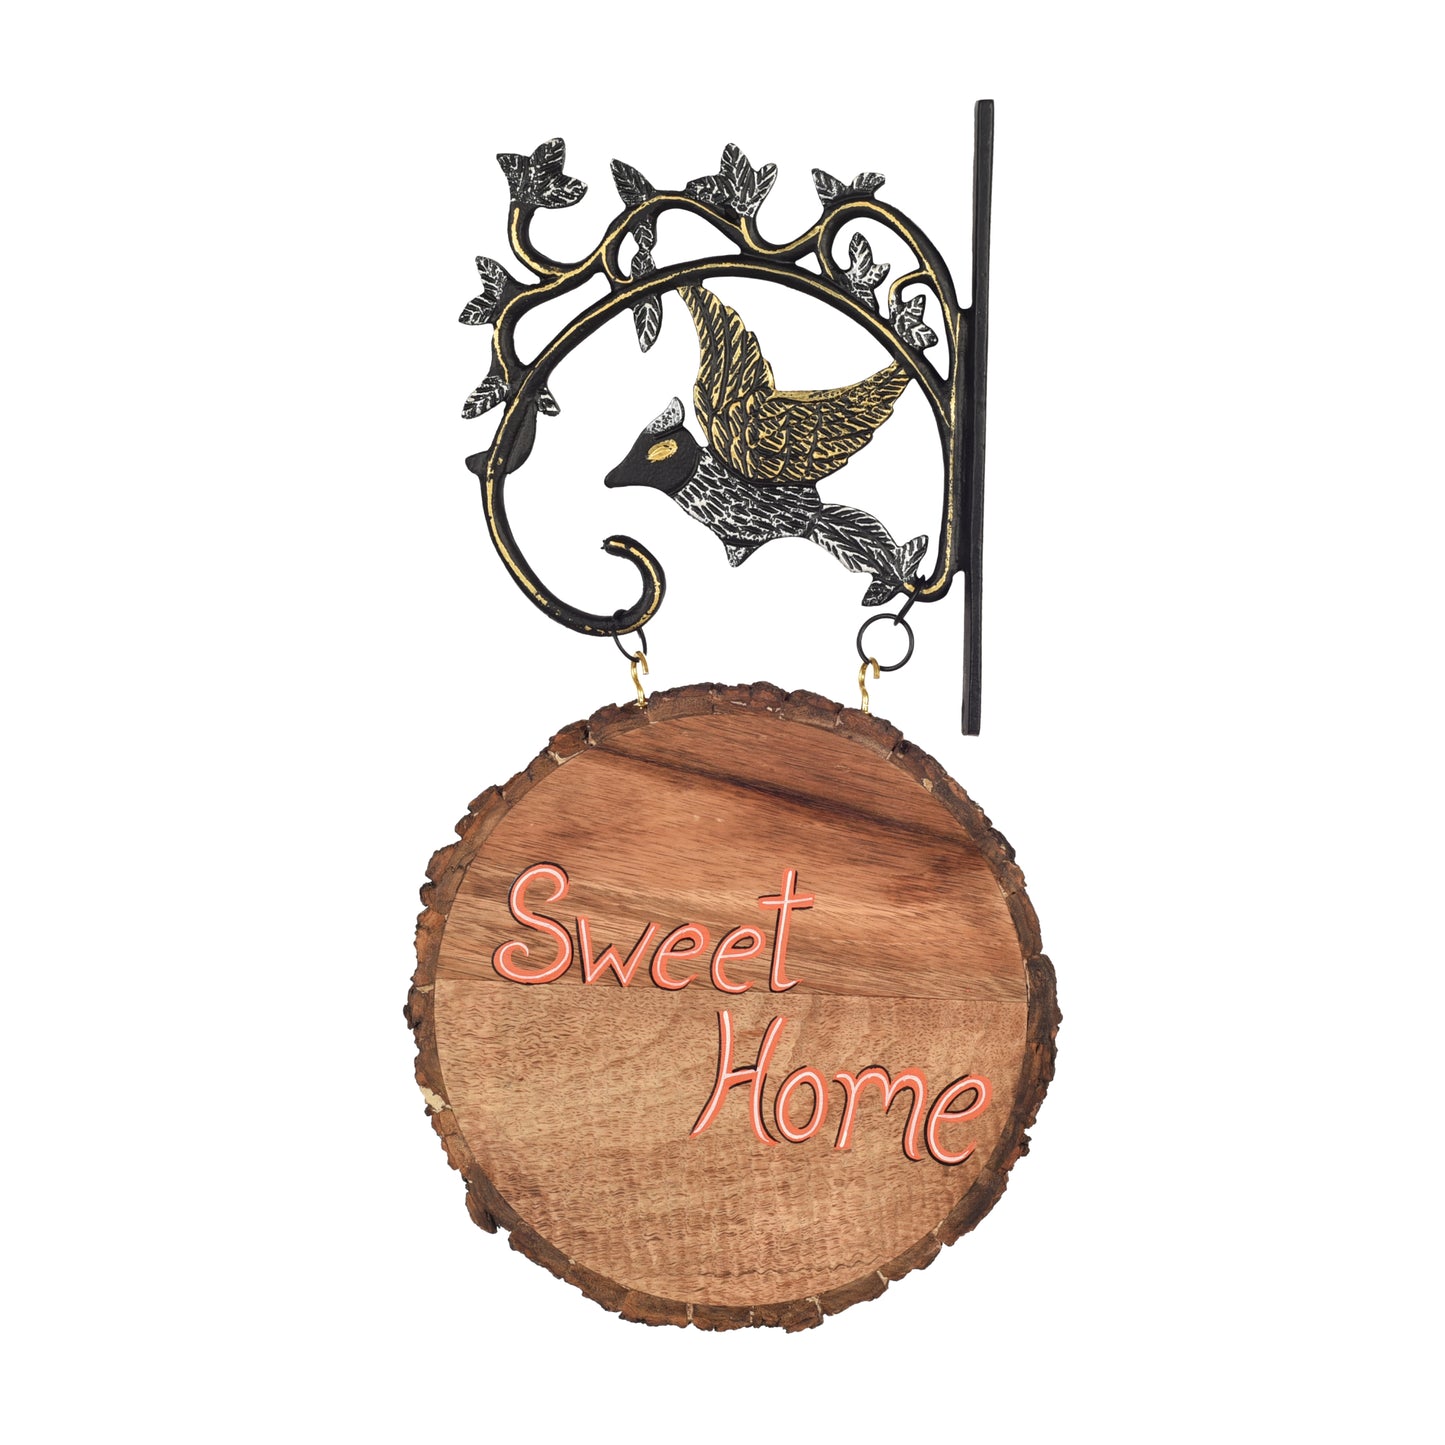 Handcrafted Mango Wood Customizable Name Board with Metal Stand